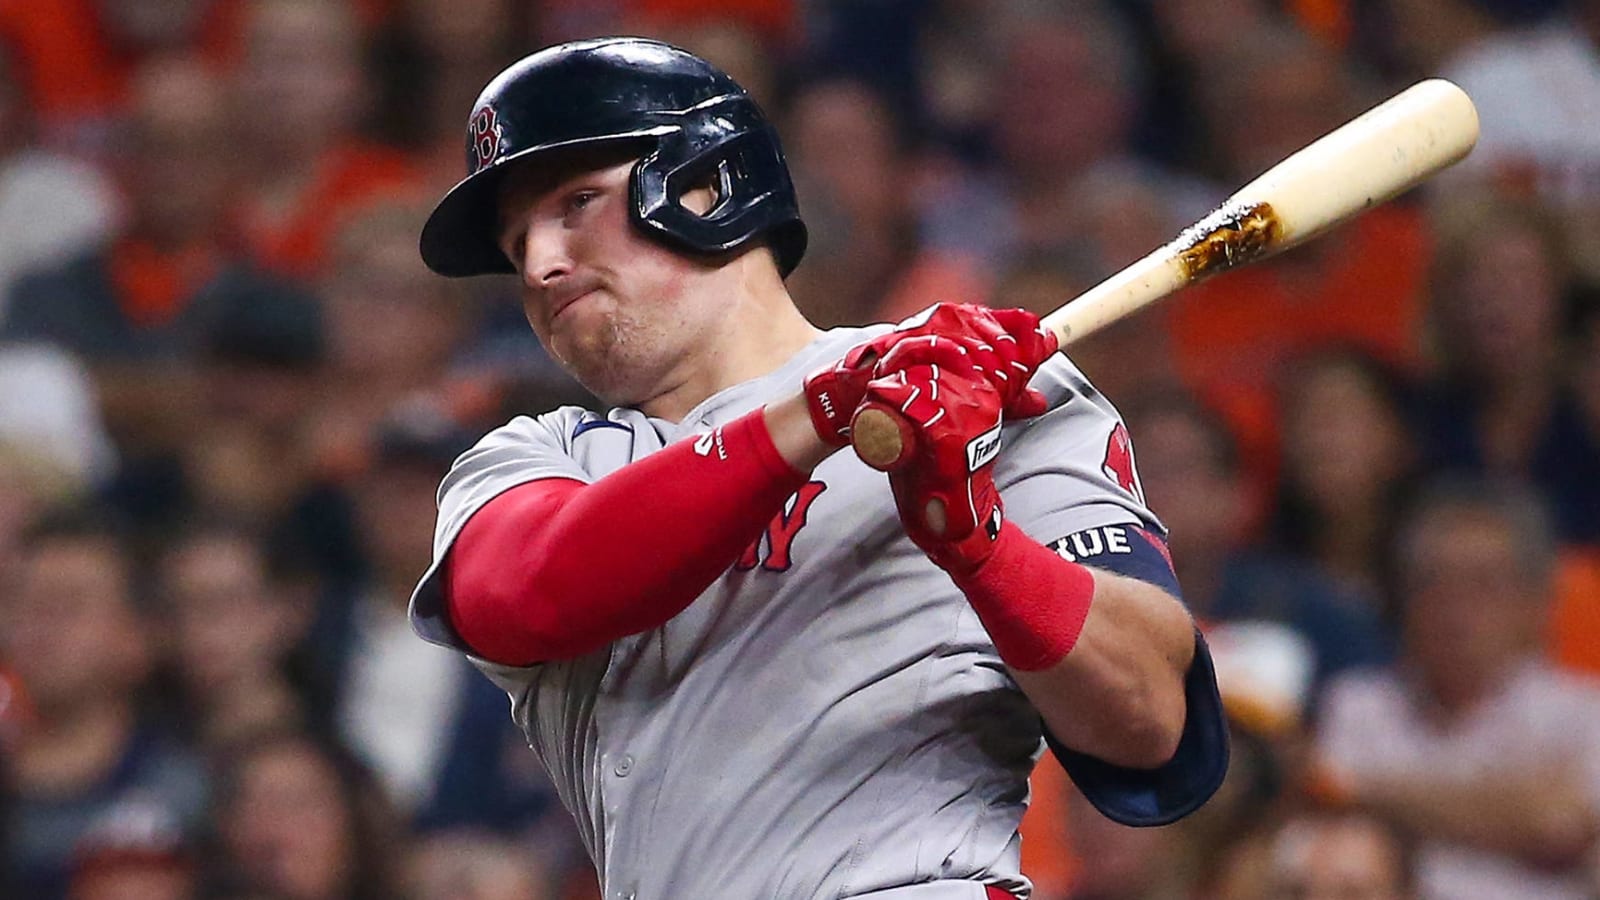 Brewers acquire Renfroe from Red Sox for Bradley Jr.